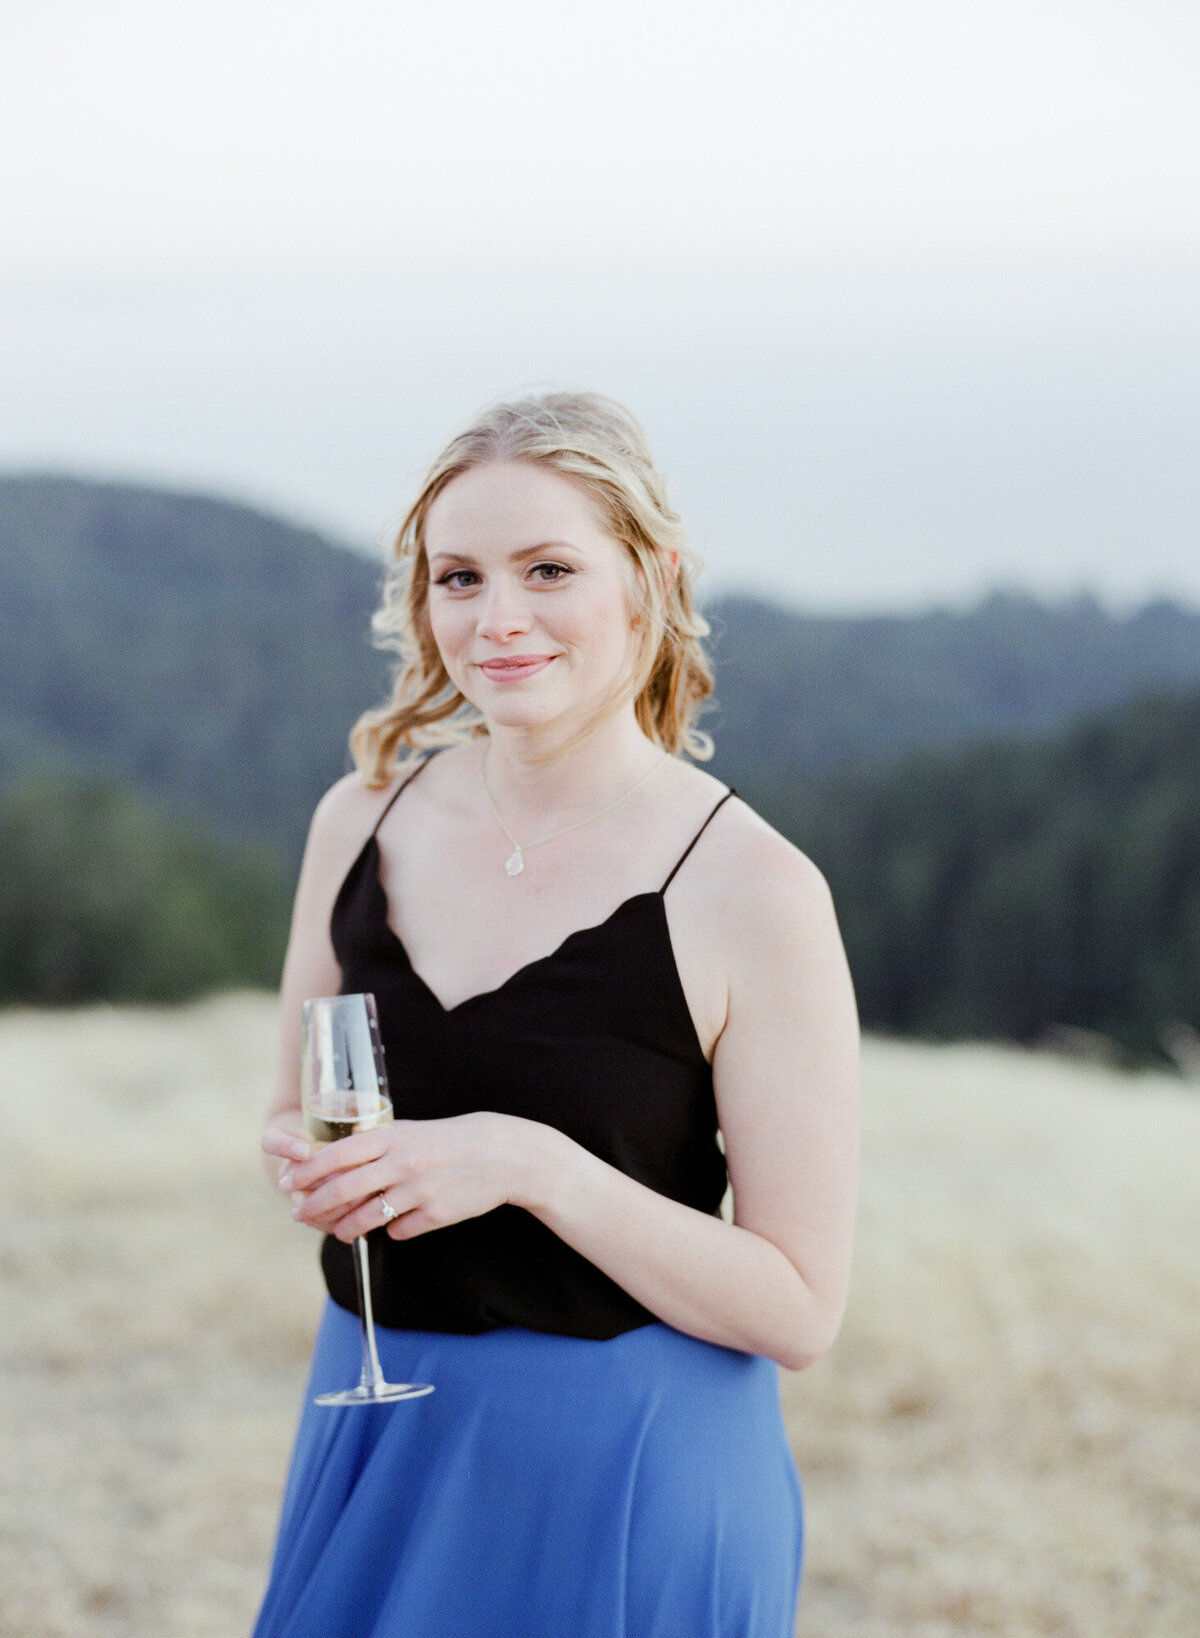 Pretty blond lady holds a glass of bubble champagne and looks compassionately at the camera. Green lush hills in the background.